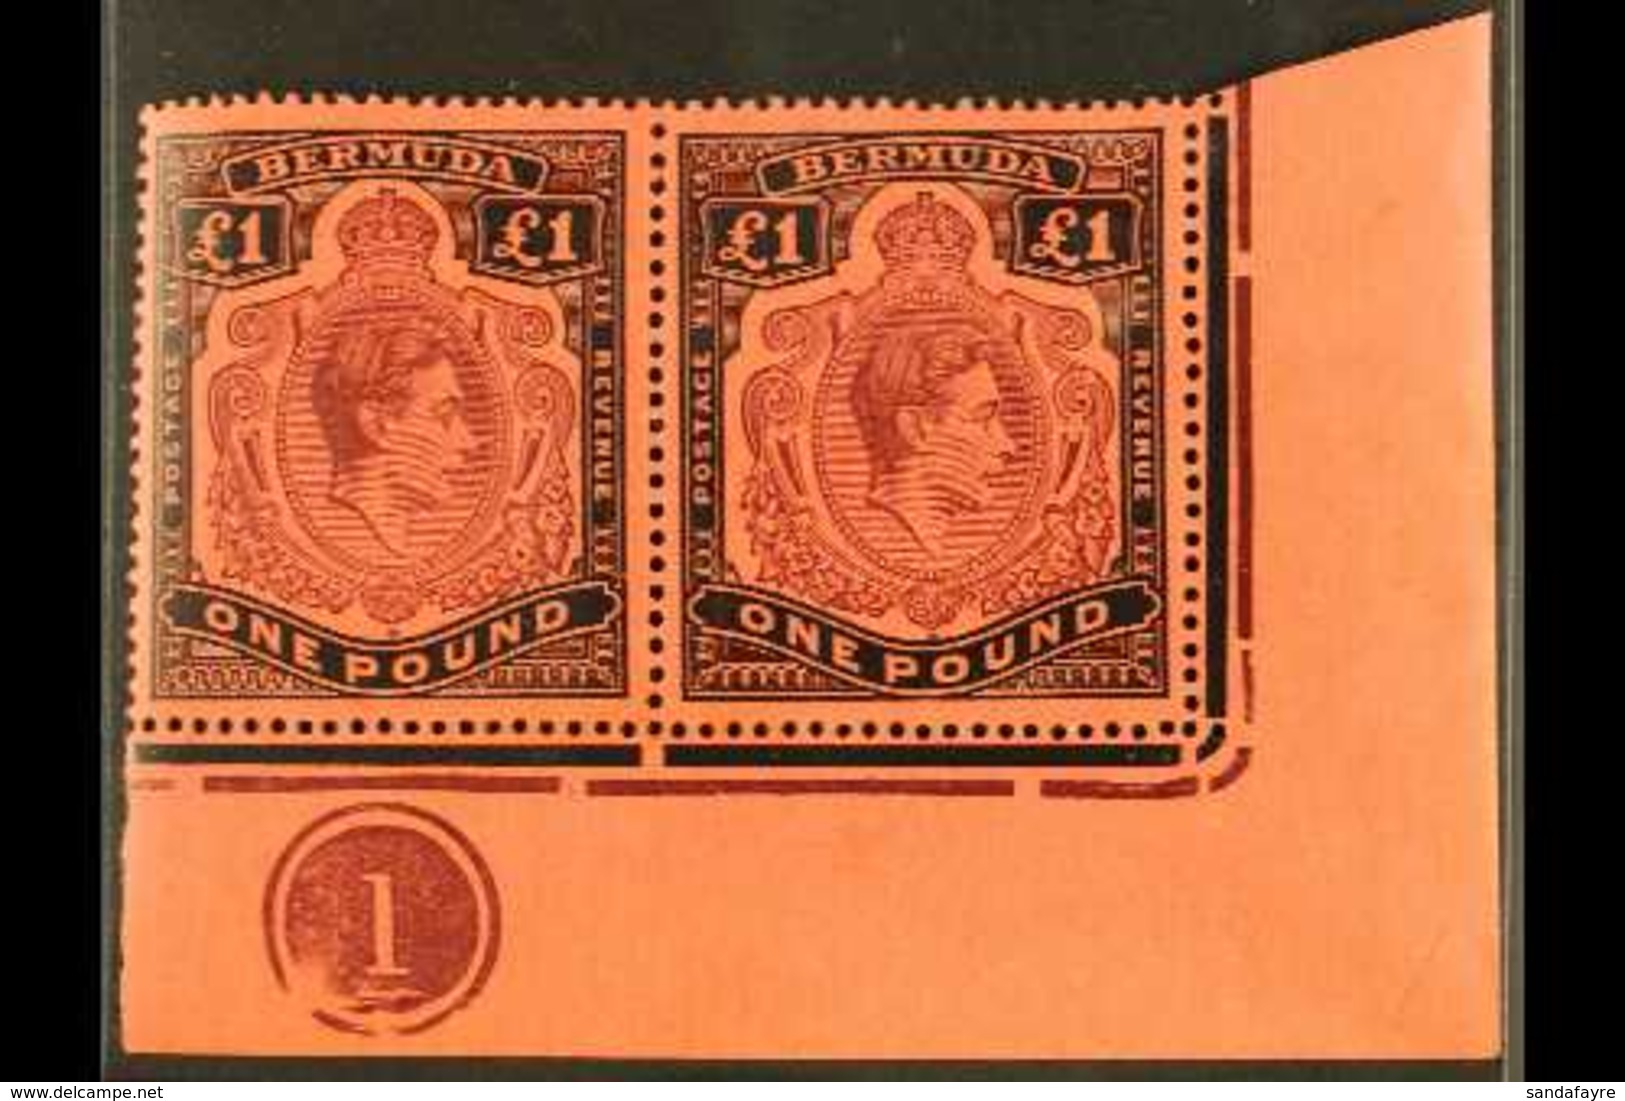 1943 £1 Deep Reddish Purple And Black With "BROKEN LOWER- RIGHT SCROLL Variety In Lower- Right Corner PLATE NUMBER PAIR  - Bermuda